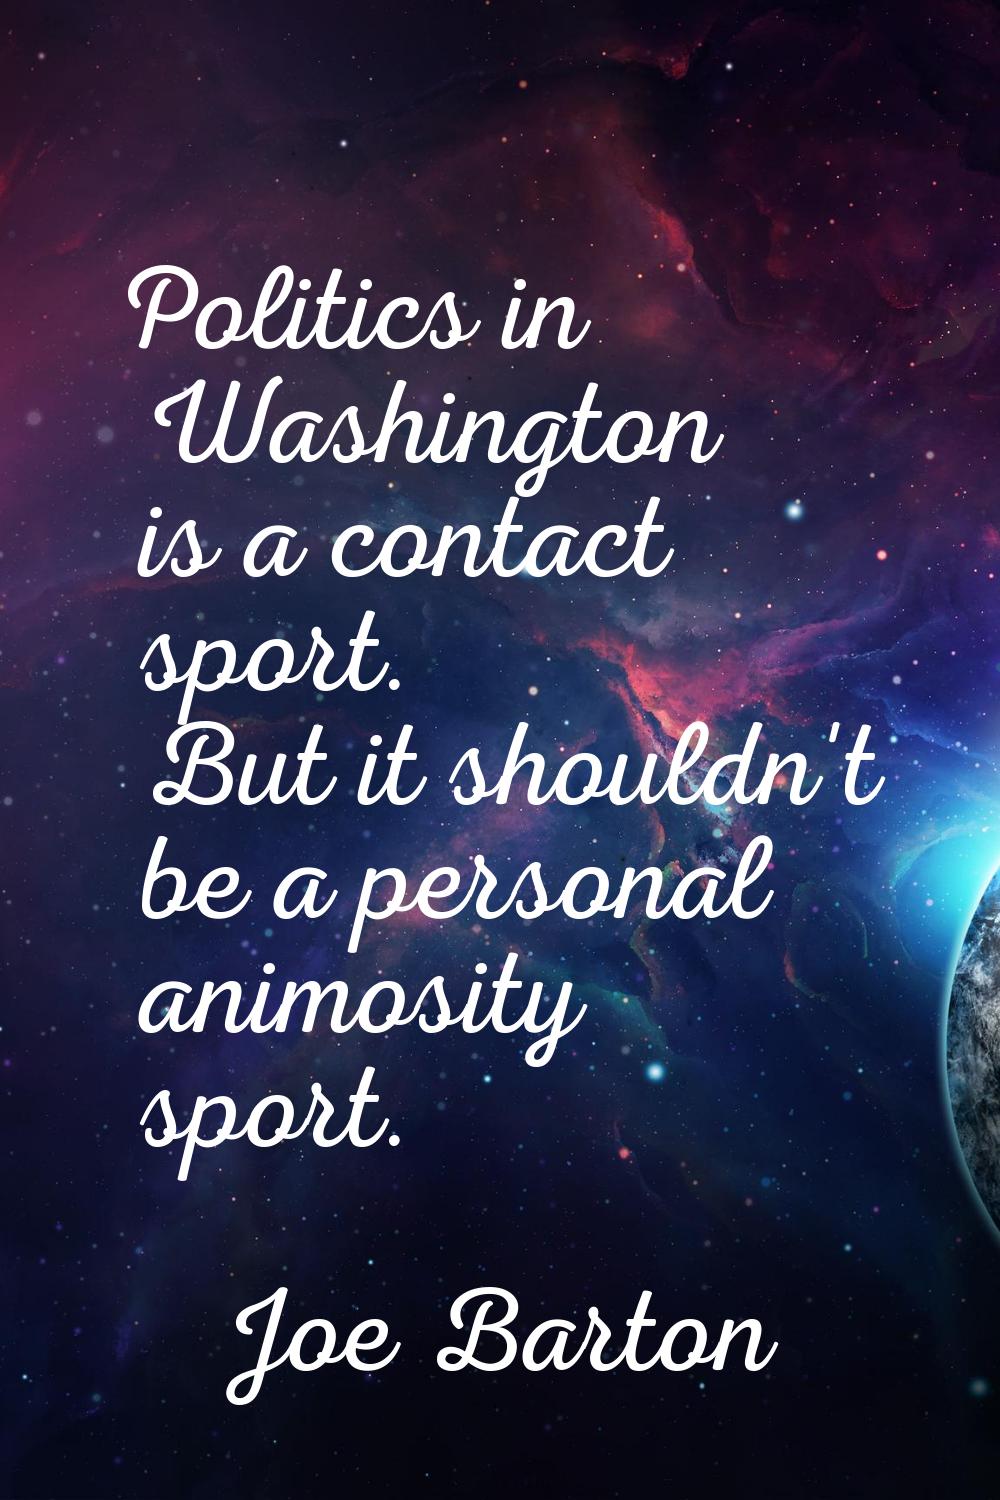 Politics in Washington is a contact sport. But it shouldn't be a personal animosity sport.